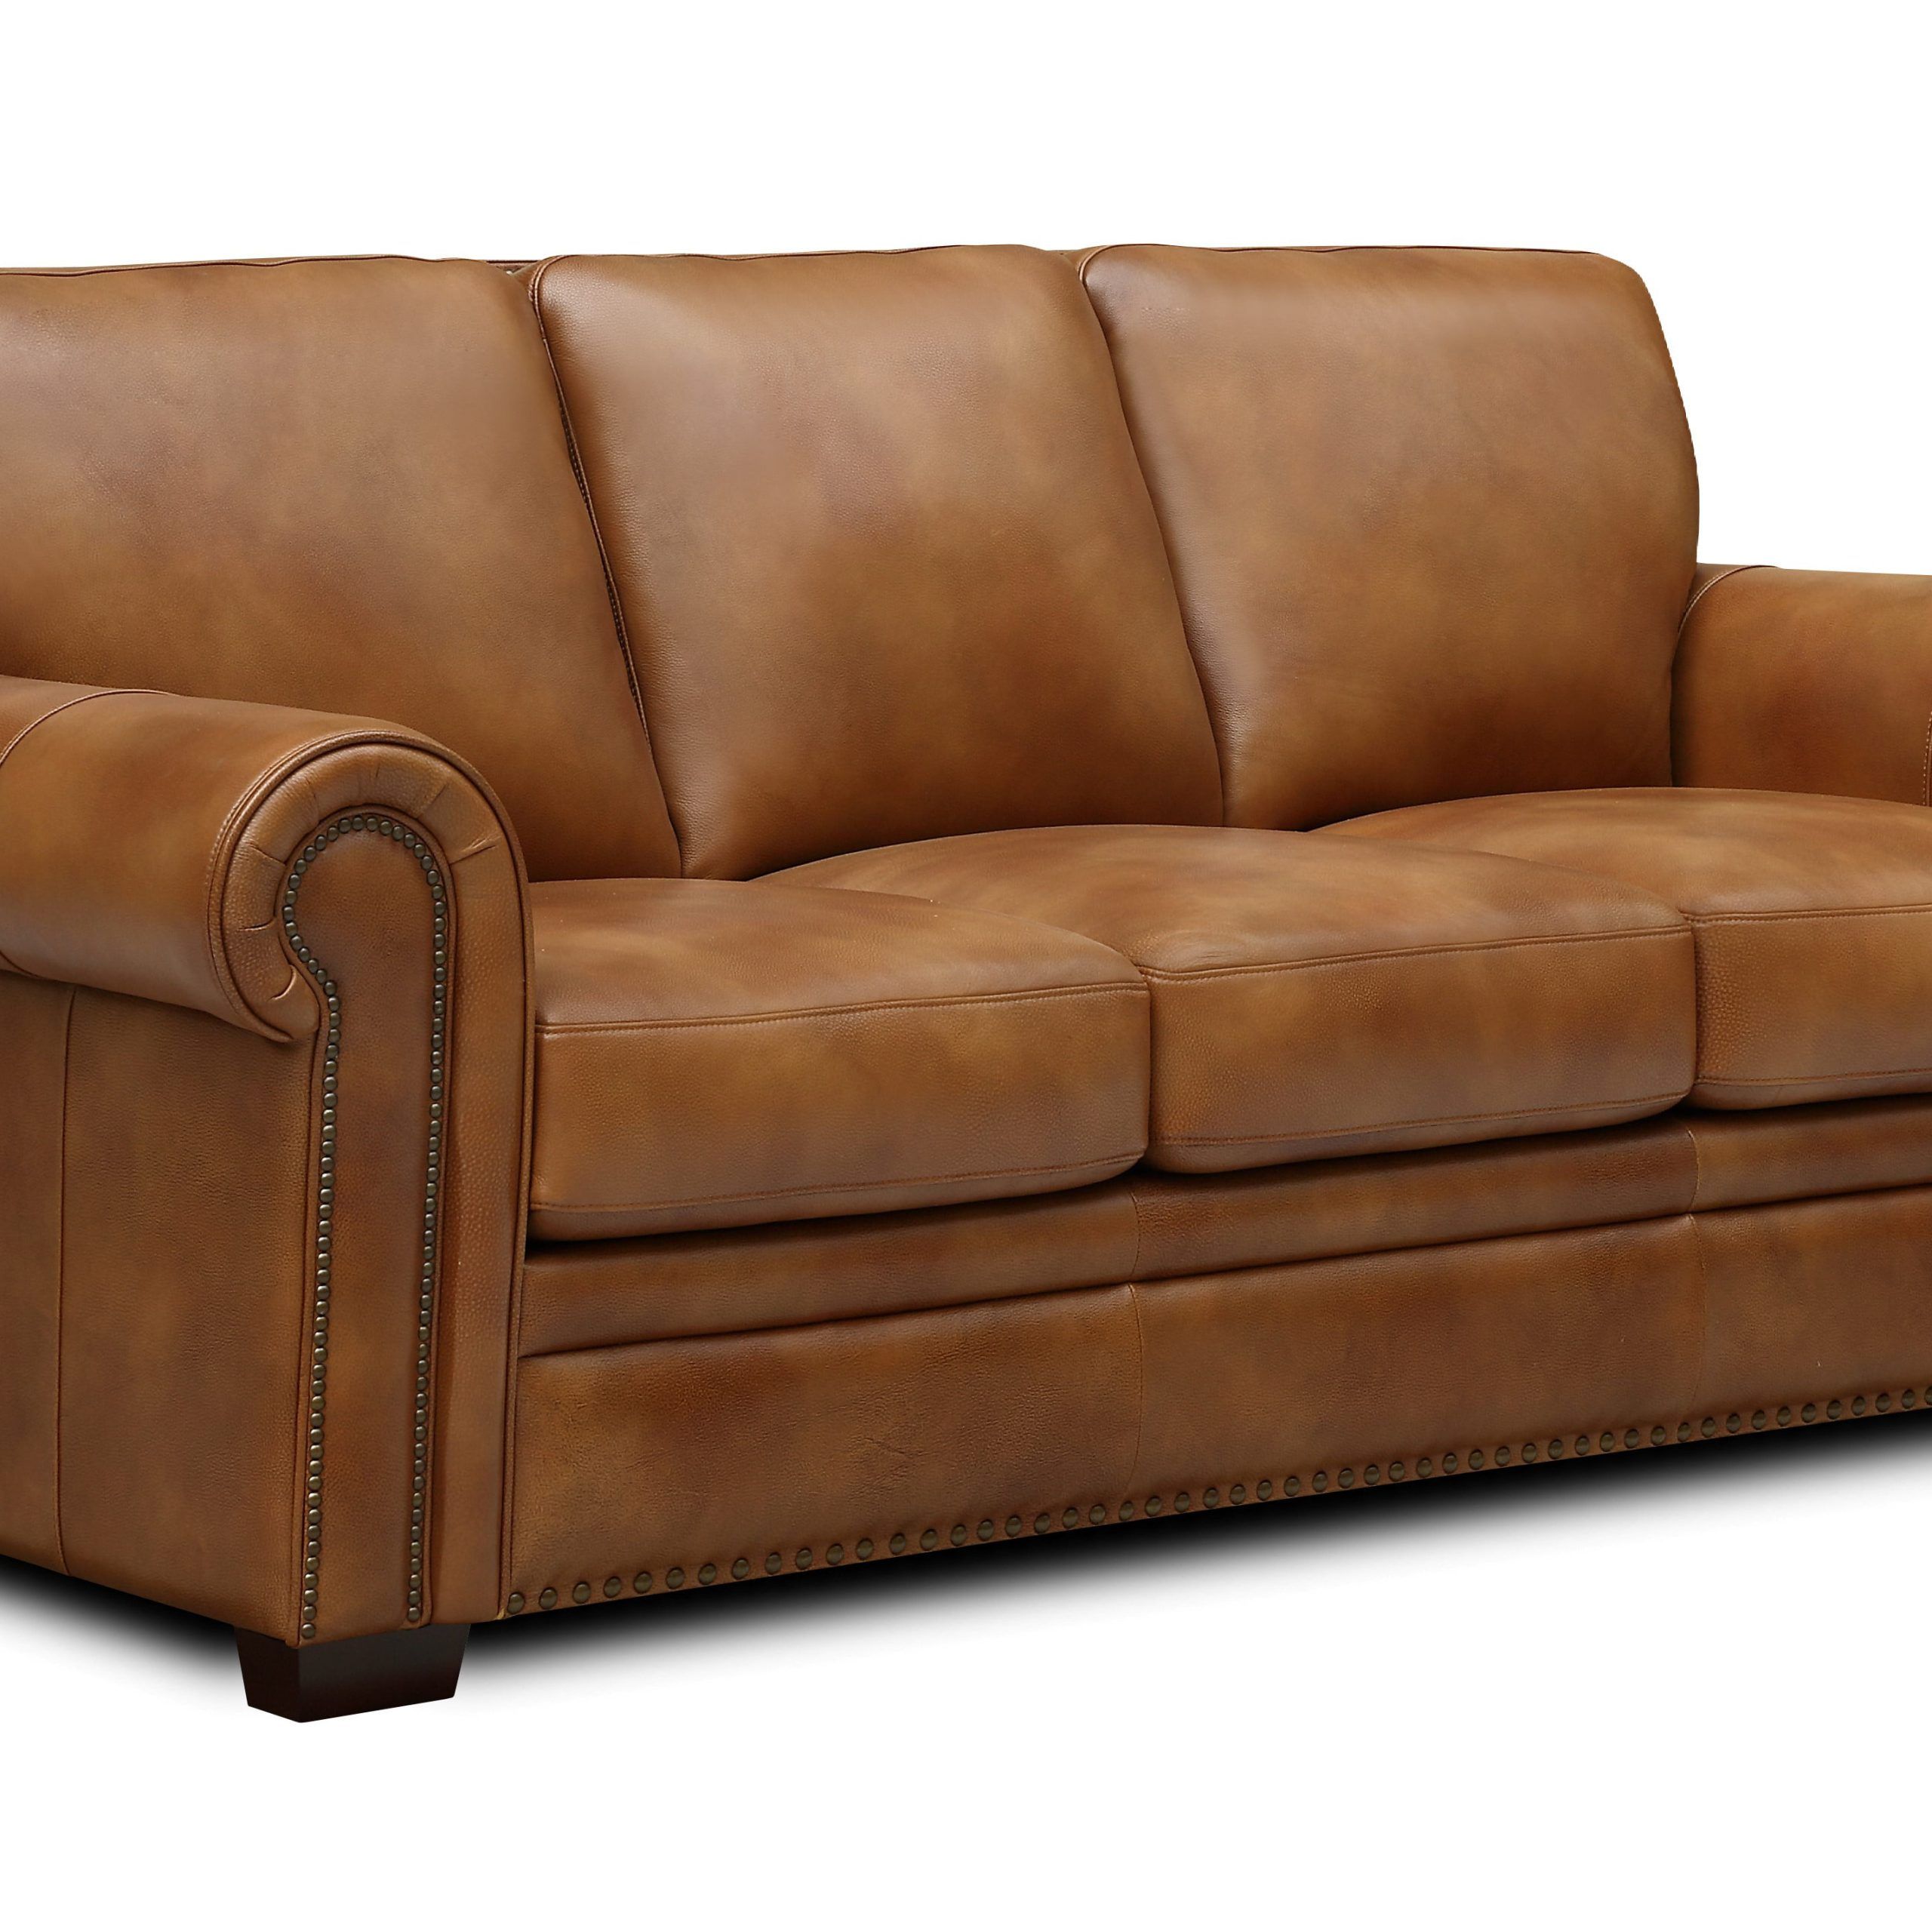 Top Grain Leather Loveseats Intended For Most Recent Toulouse Top Grain Leather Sofa – Walmart (Photo 5 of 15)